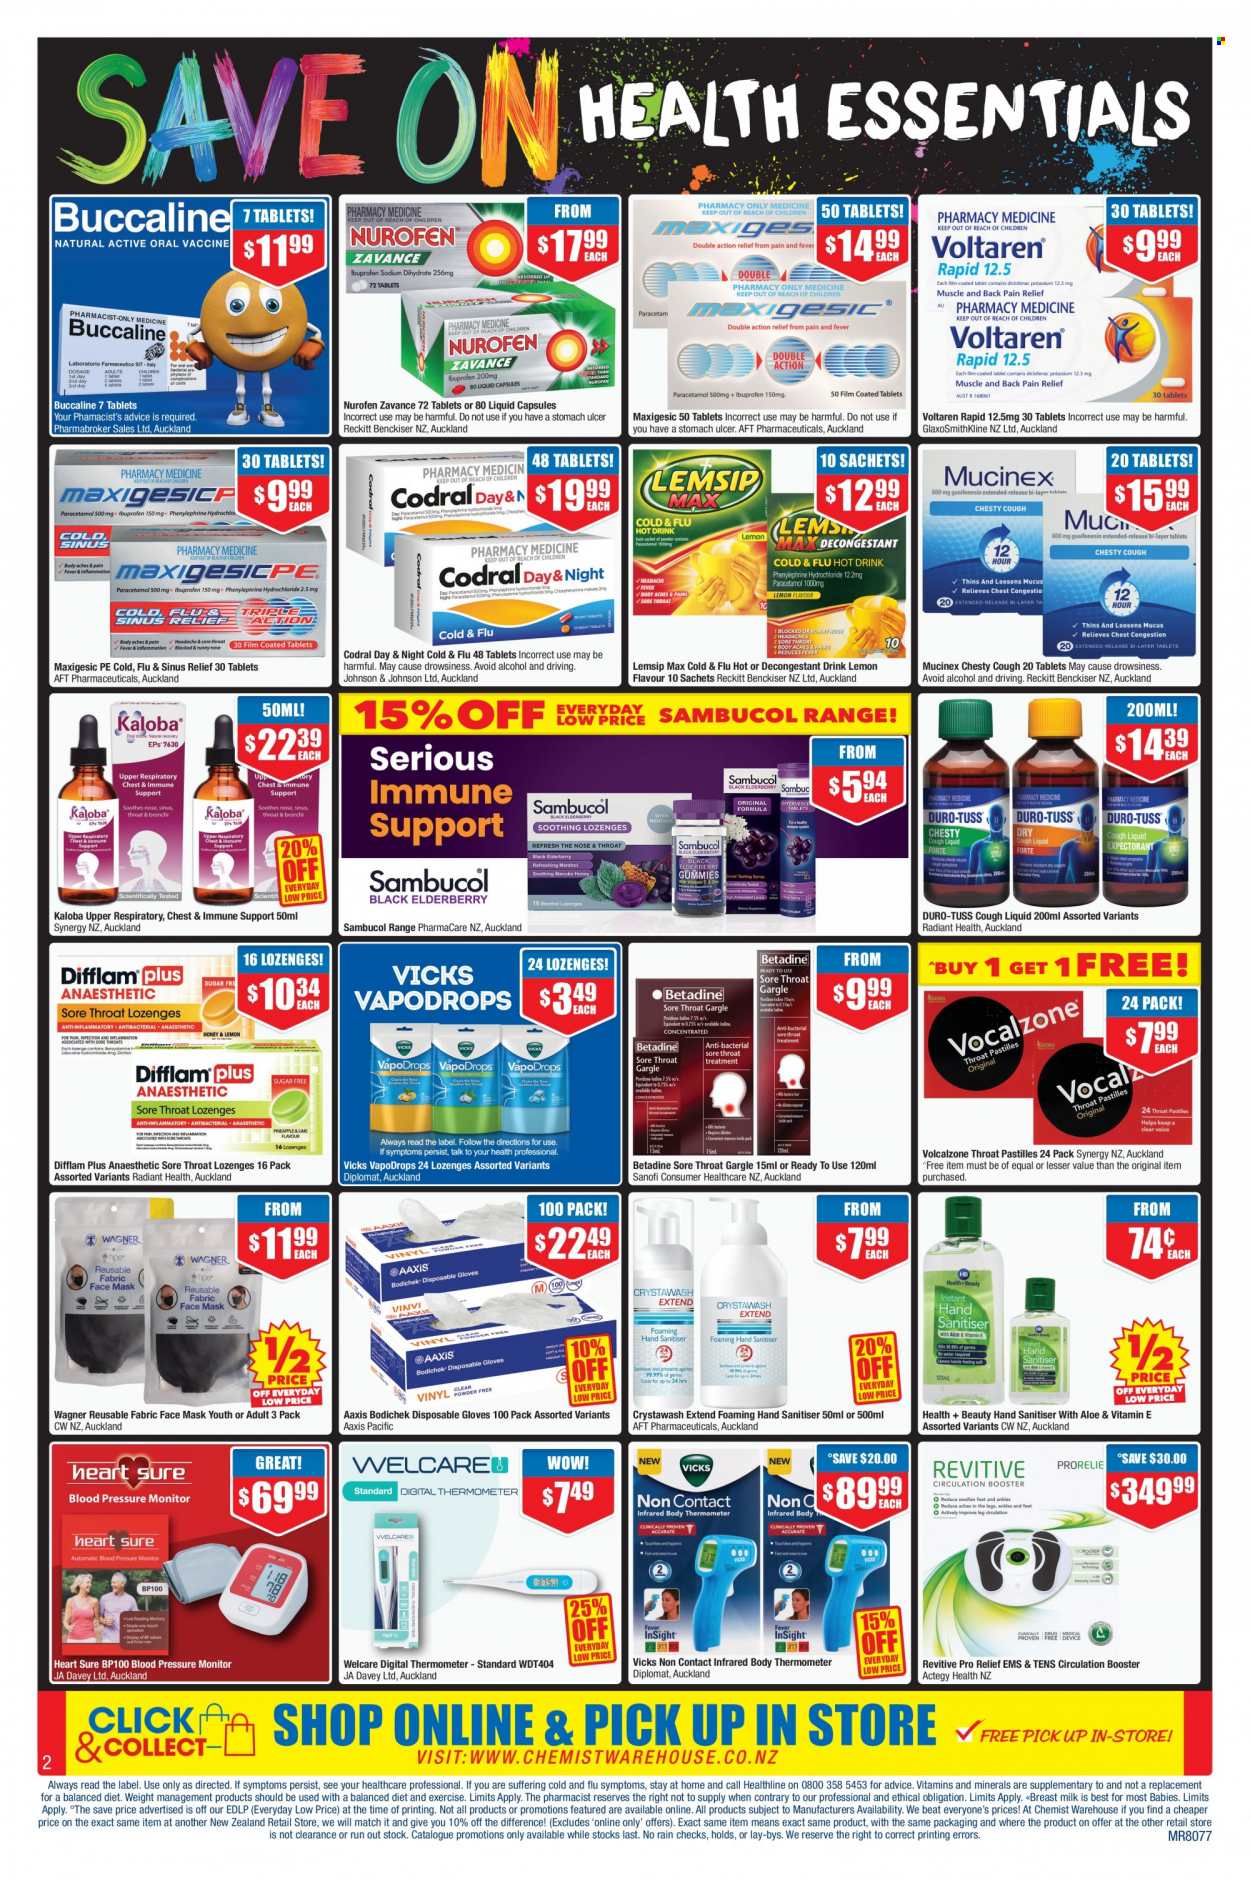 thumbnail - Chemist Warehouse mailer - 09.05.2022 - 22.05.2022 - Sales products - Johnson's, face mask, Sure, Vicks, pressure monitor, Revitive, Cold & Flu, Mucinex, Betadine, Nurofen, Sambucol, Codral, gloves, thermometer, disposable gloves. Page 2.